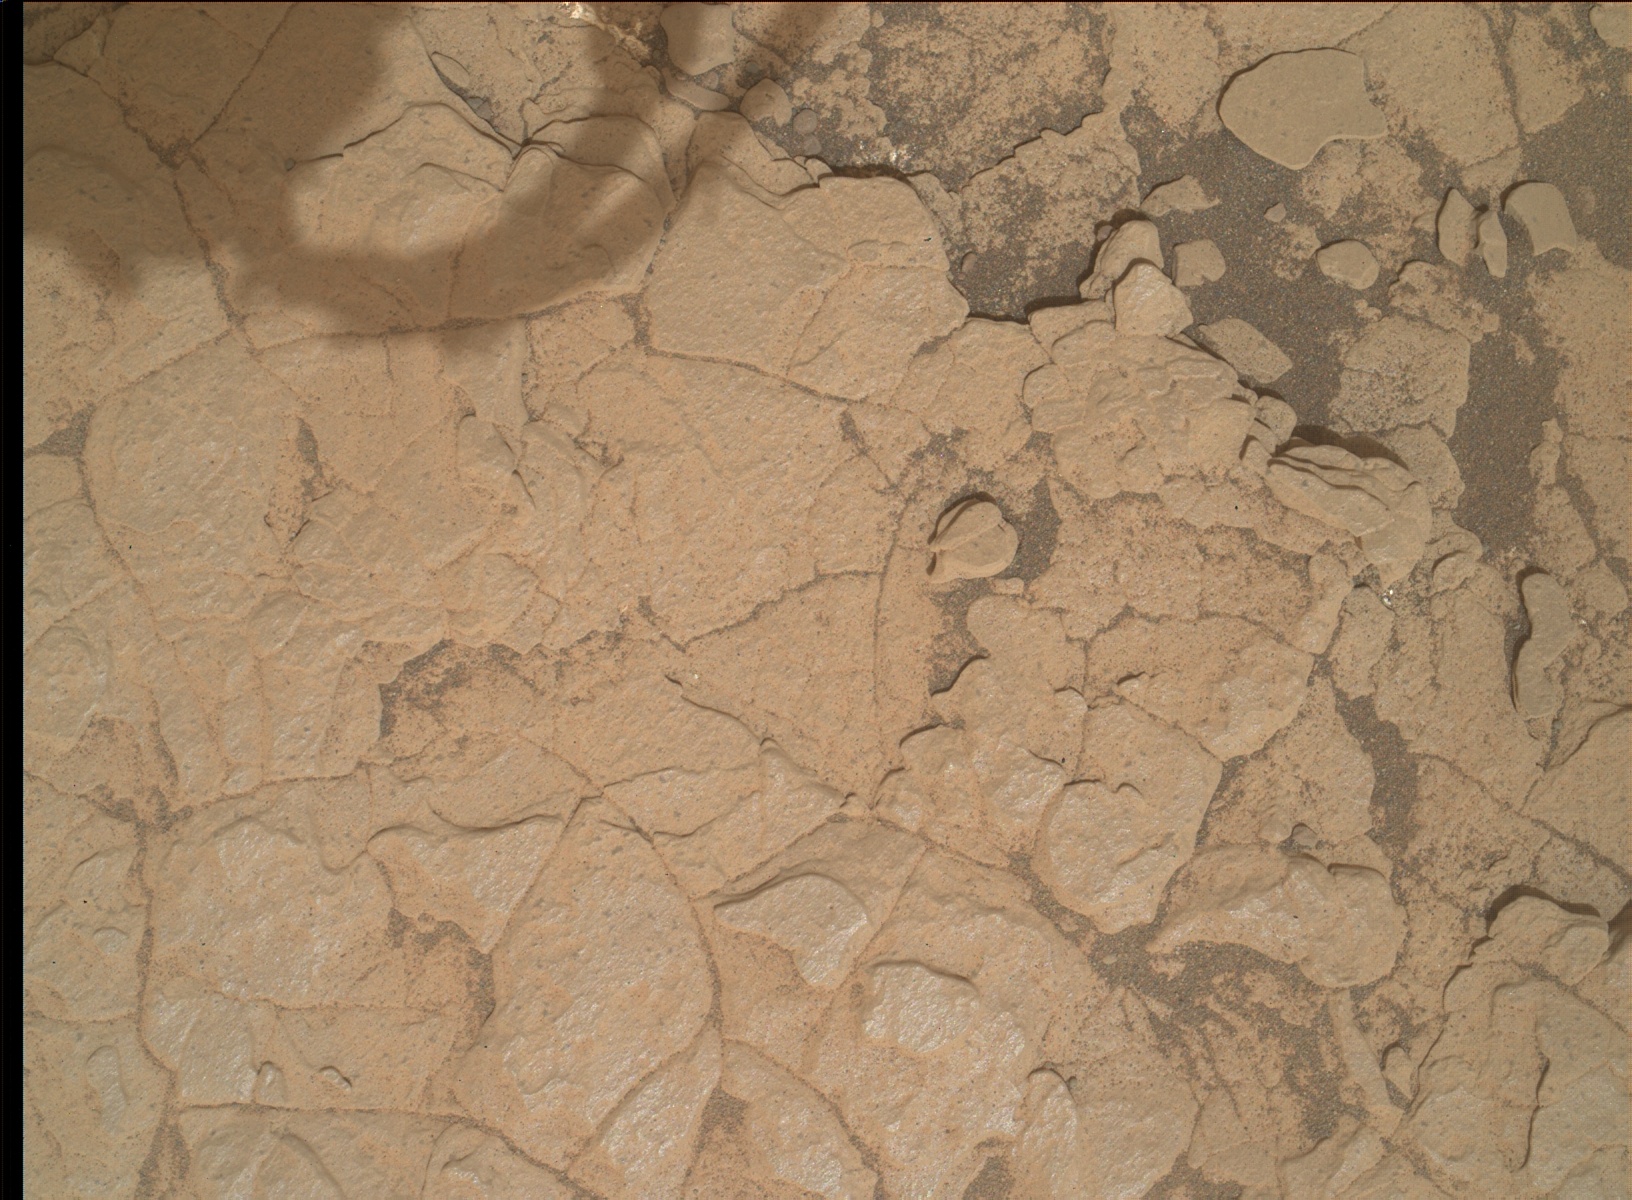 Nasa's Mars rover Curiosity acquired this image using its Mars Hand Lens Imager (MAHLI) on Sol 2836, at drive 2176, site number 82